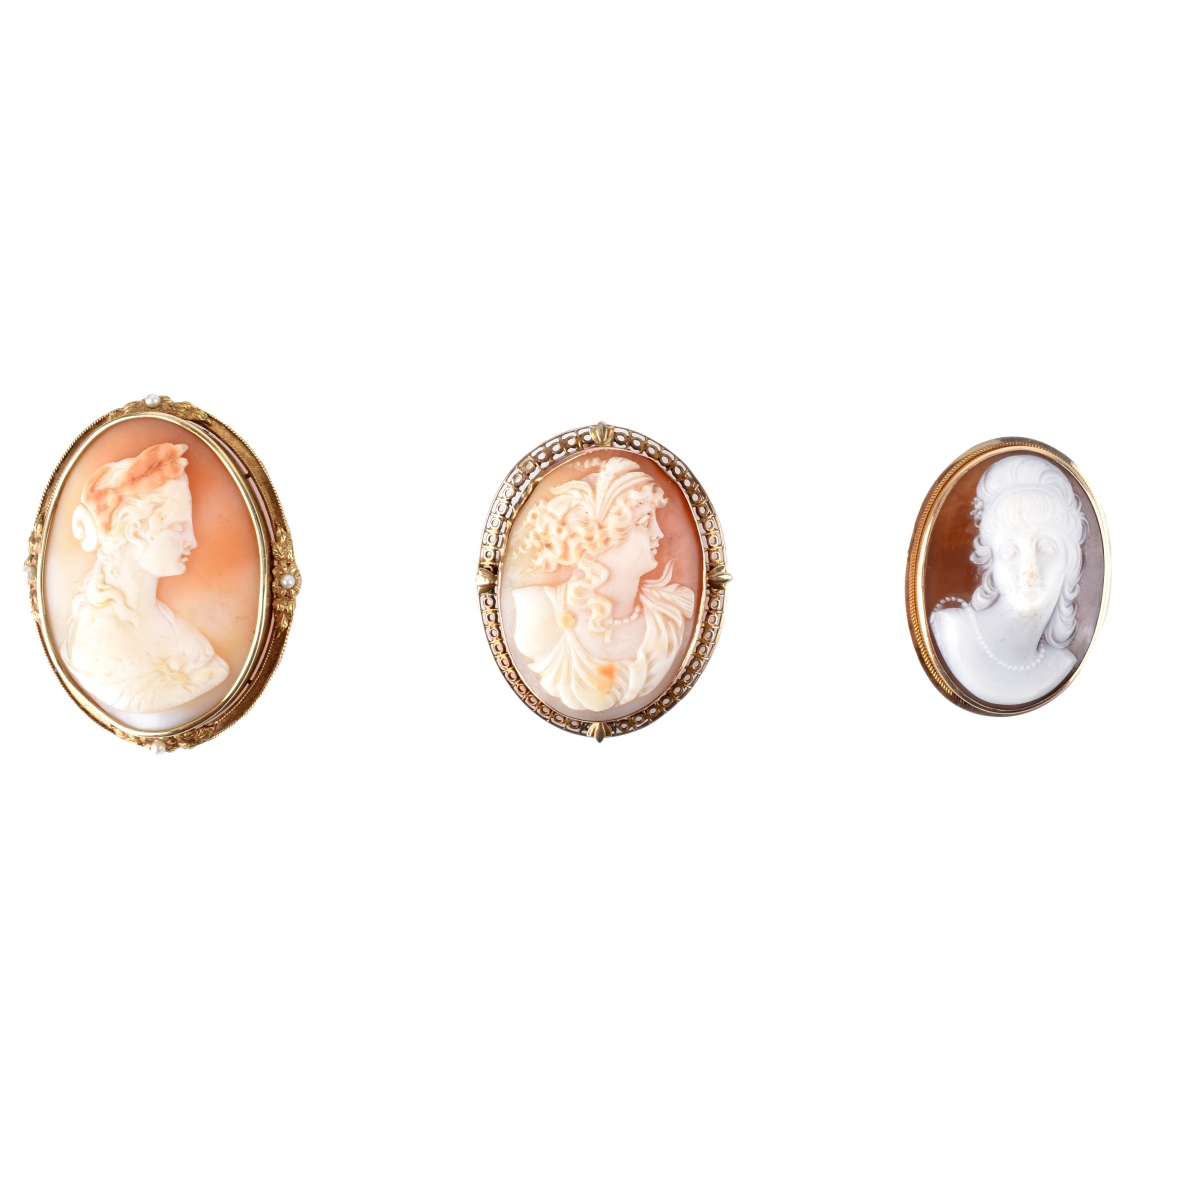 Three Antique Cameo Brooches